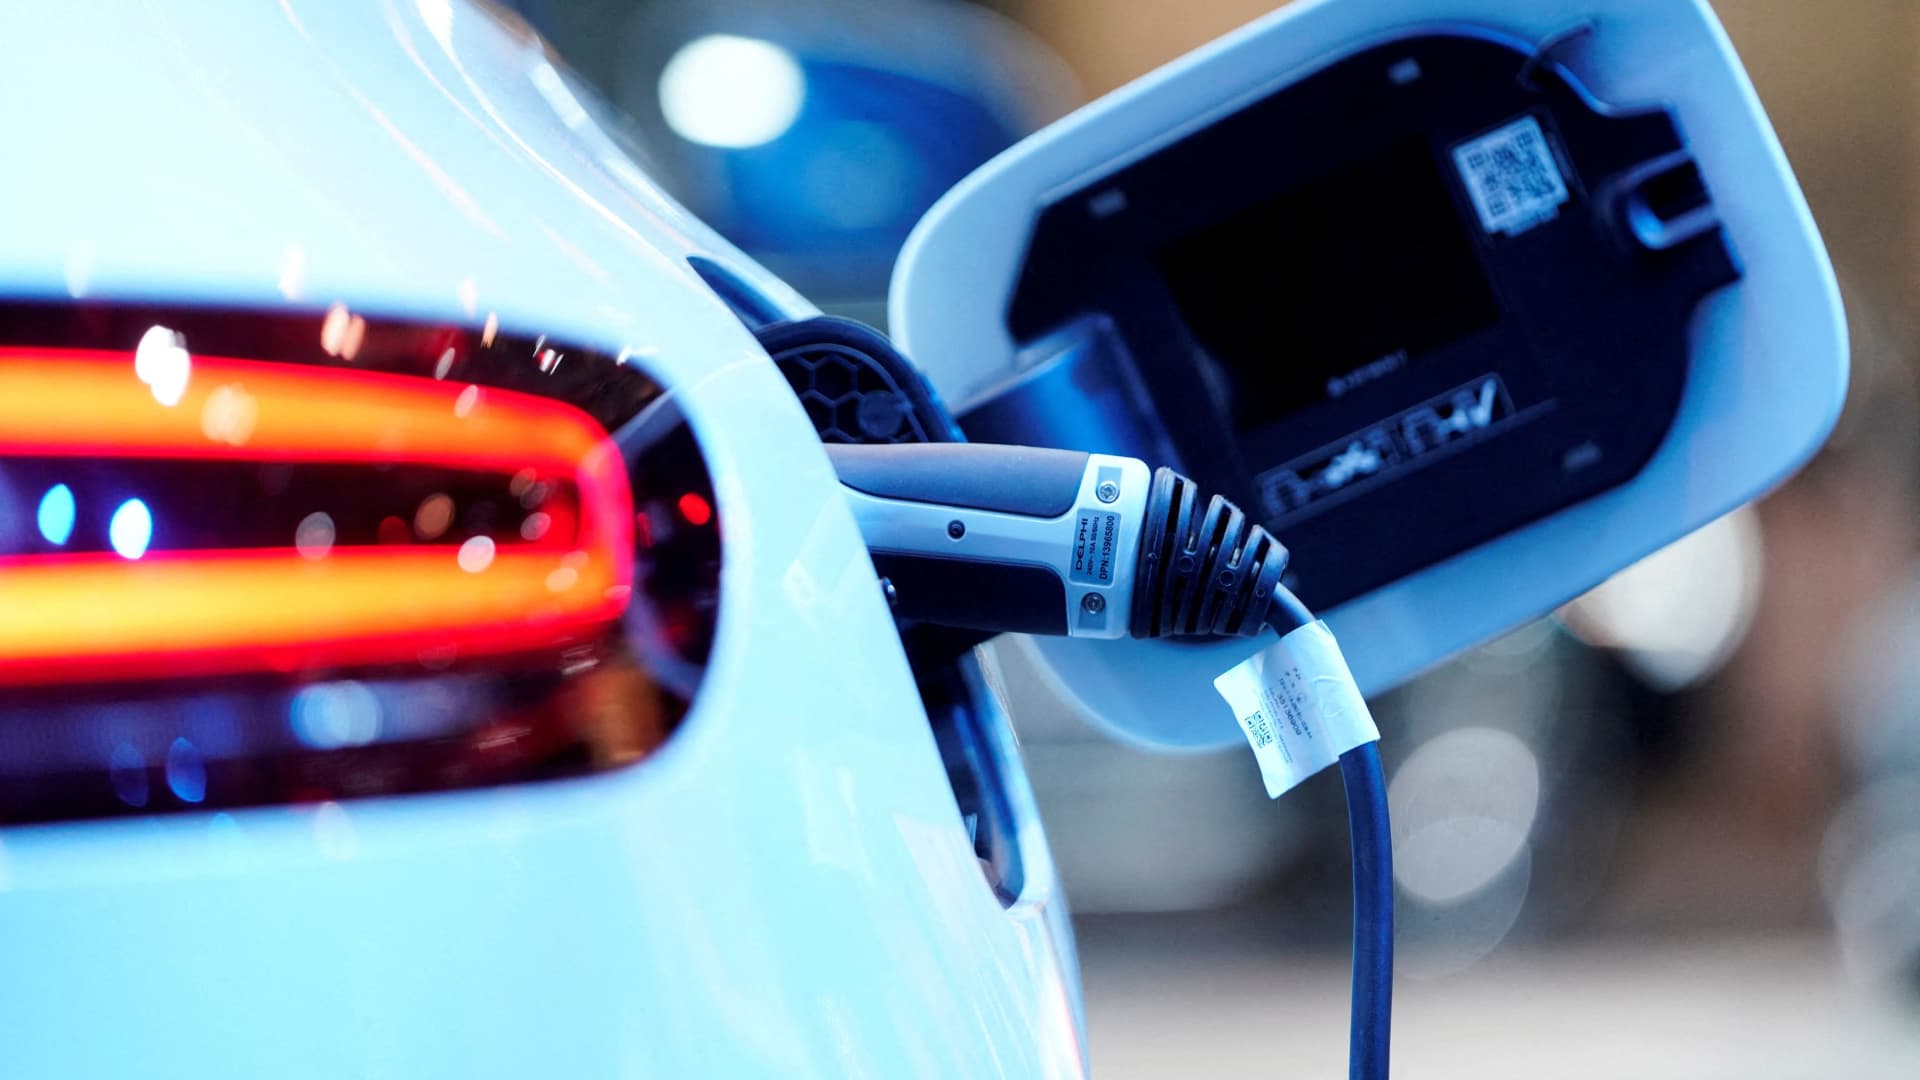 The economic case for EVs is getting better as gas prices surge